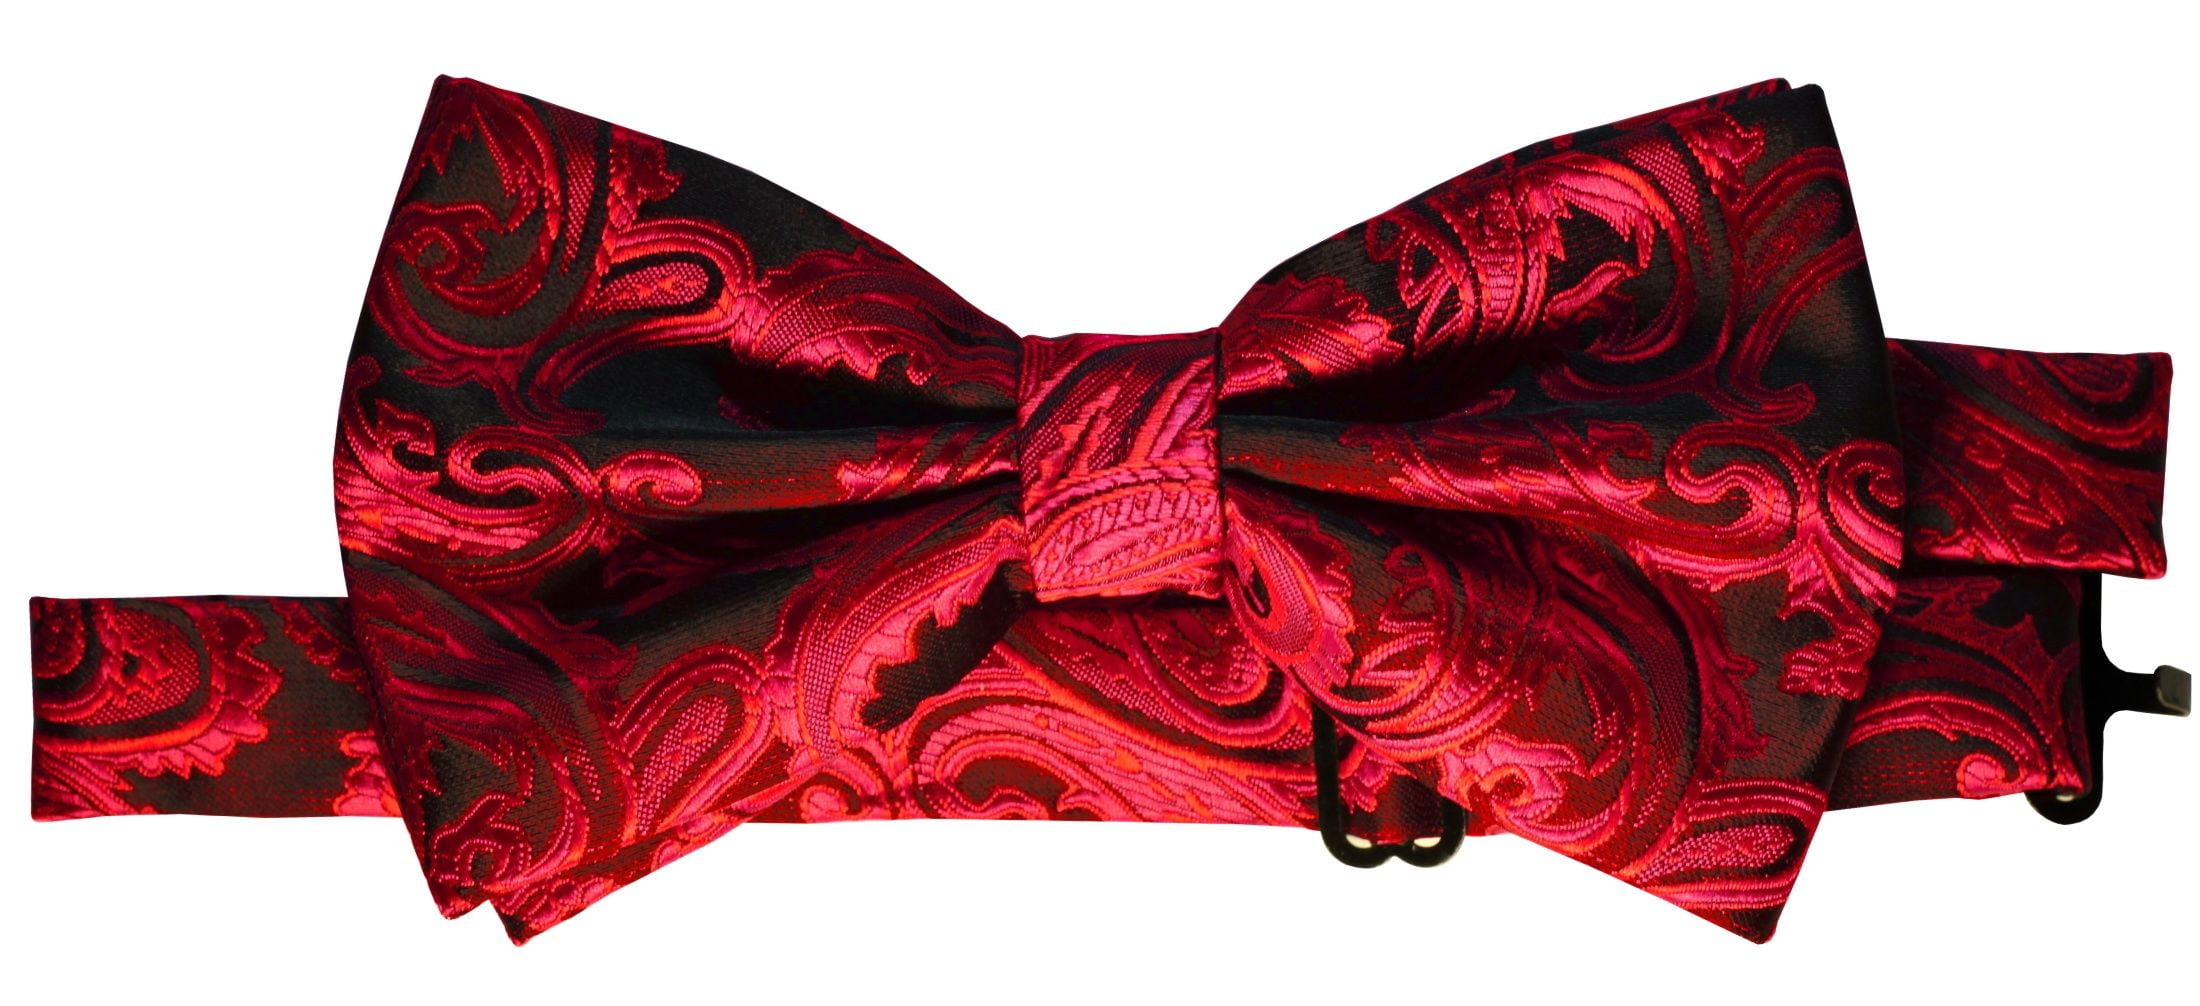 Paisley Men's Bow Tie British Style Jacquard Oversized Pre-Tied Wedding Party 